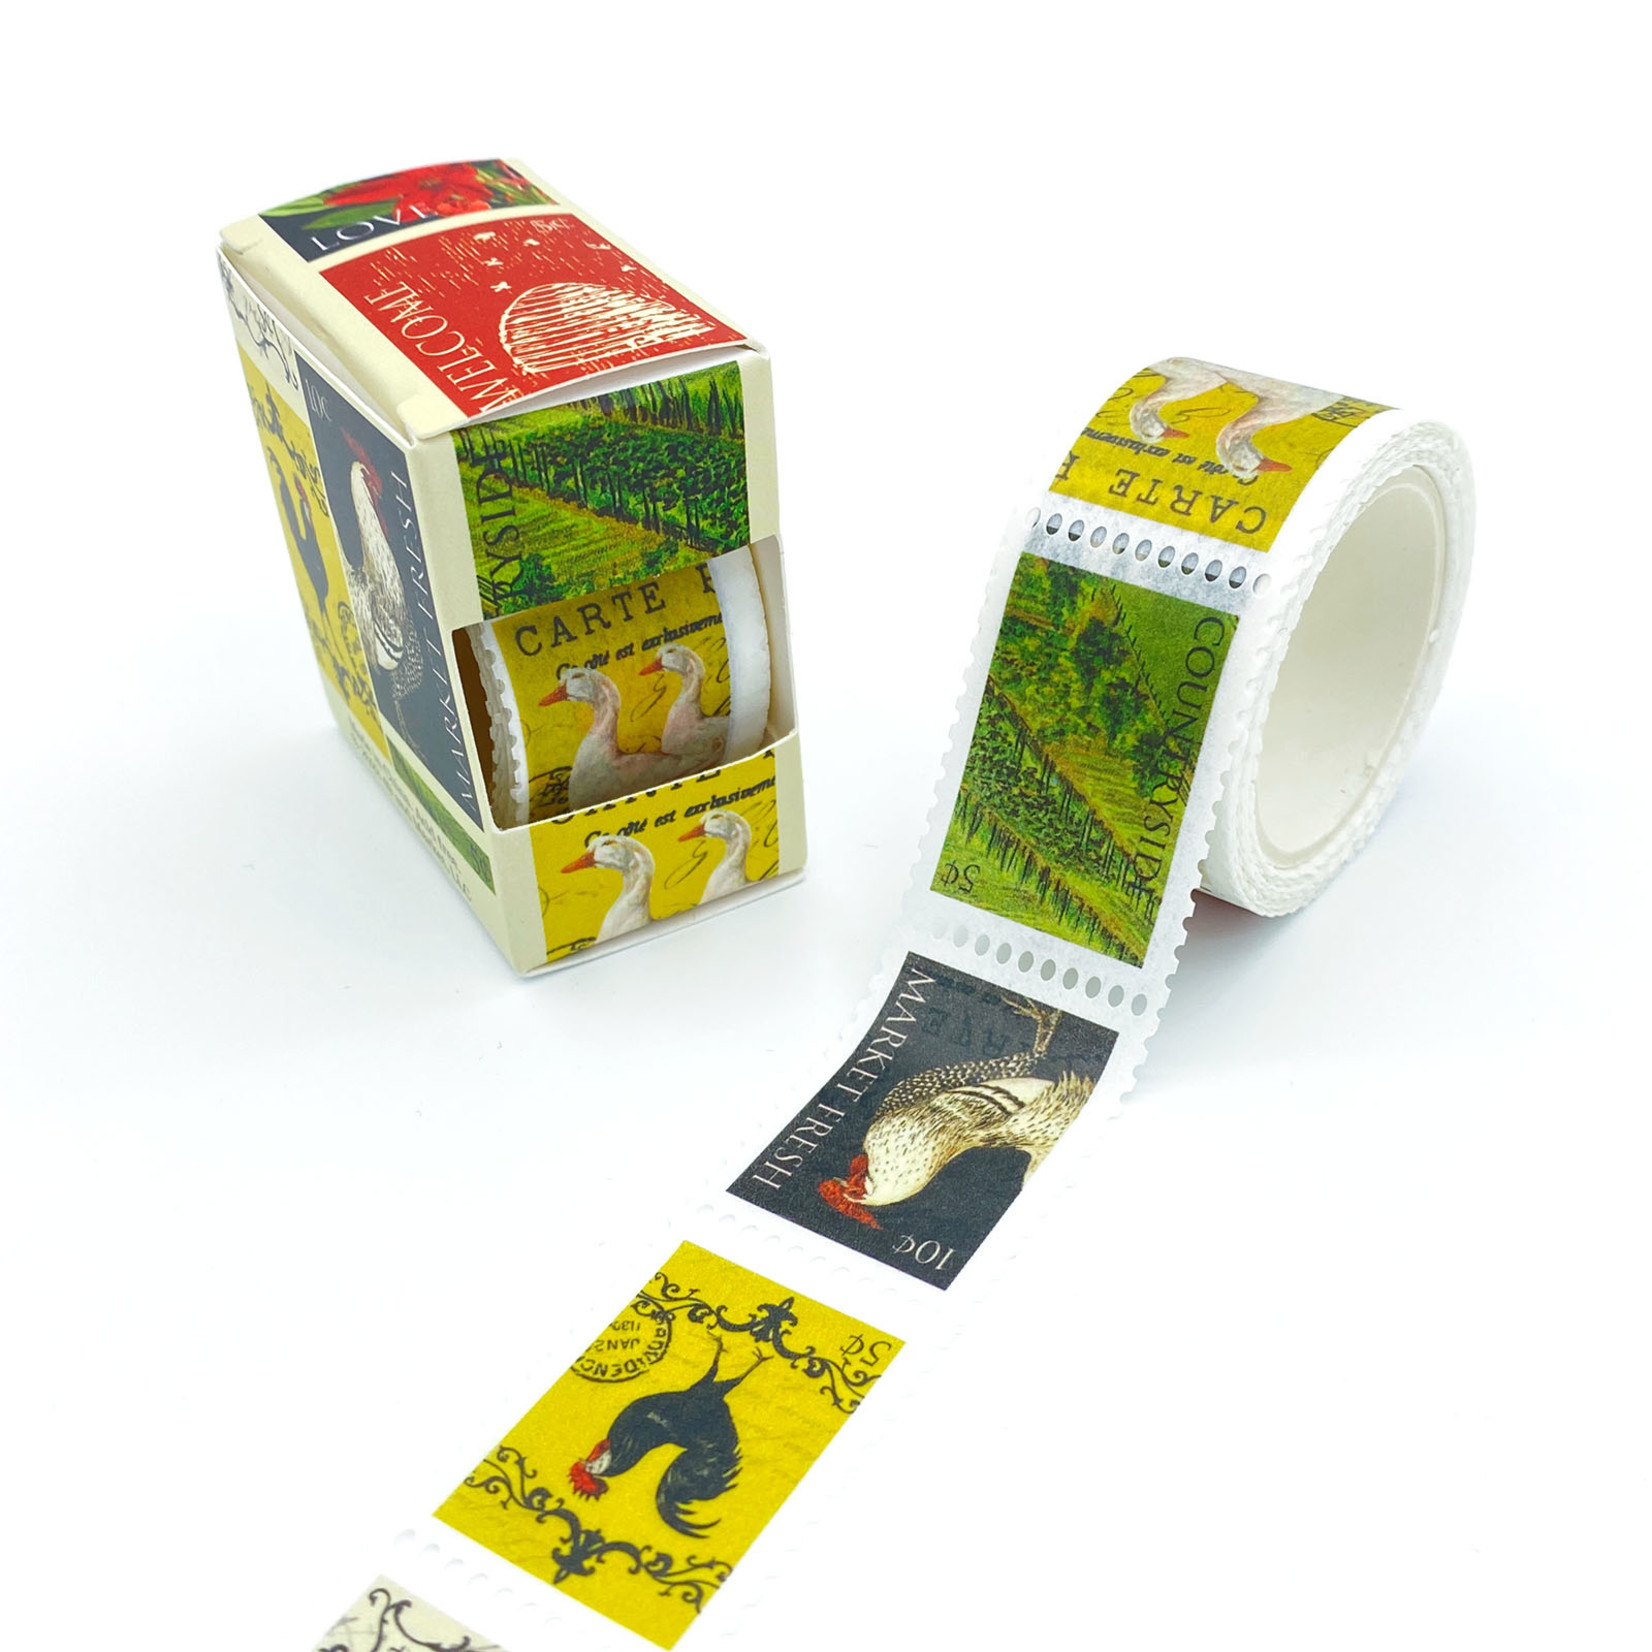 49 AND MARKET POSTAGE STAMP WASHI TAPE VINTAGE ARTISTRY COUNTRYSIDE